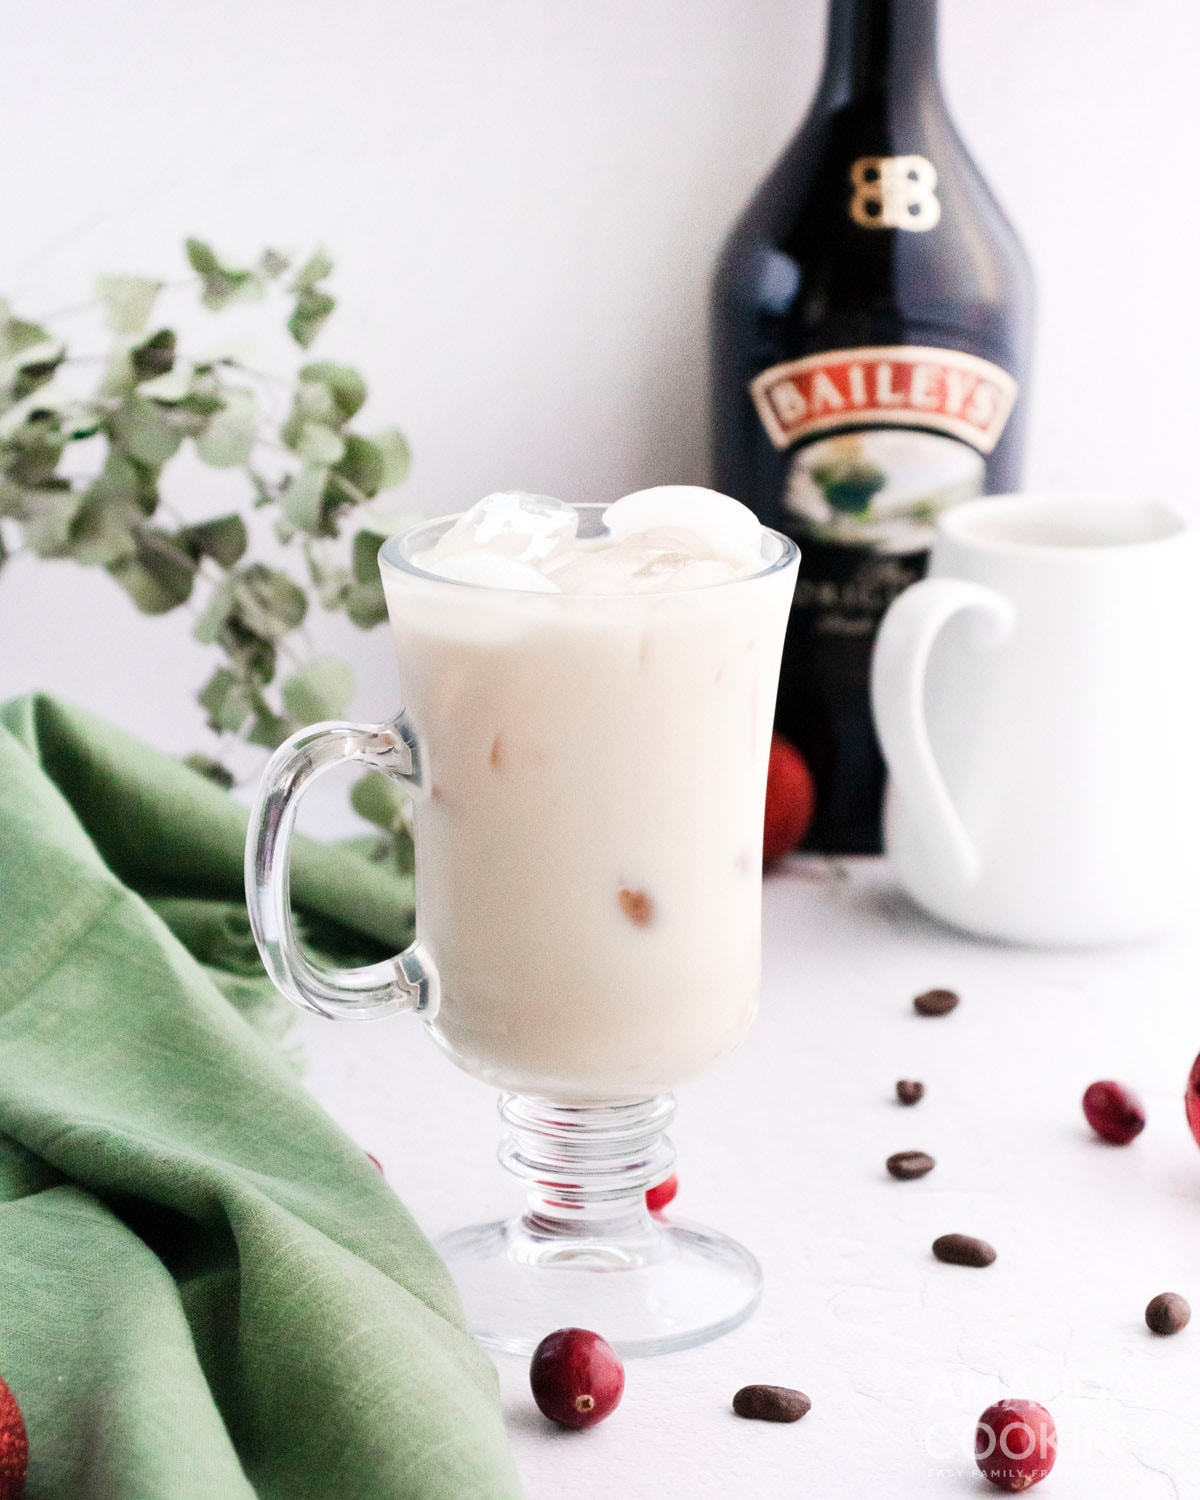 Bailey's White Russian - Amanda's Cookin' - Cocktails